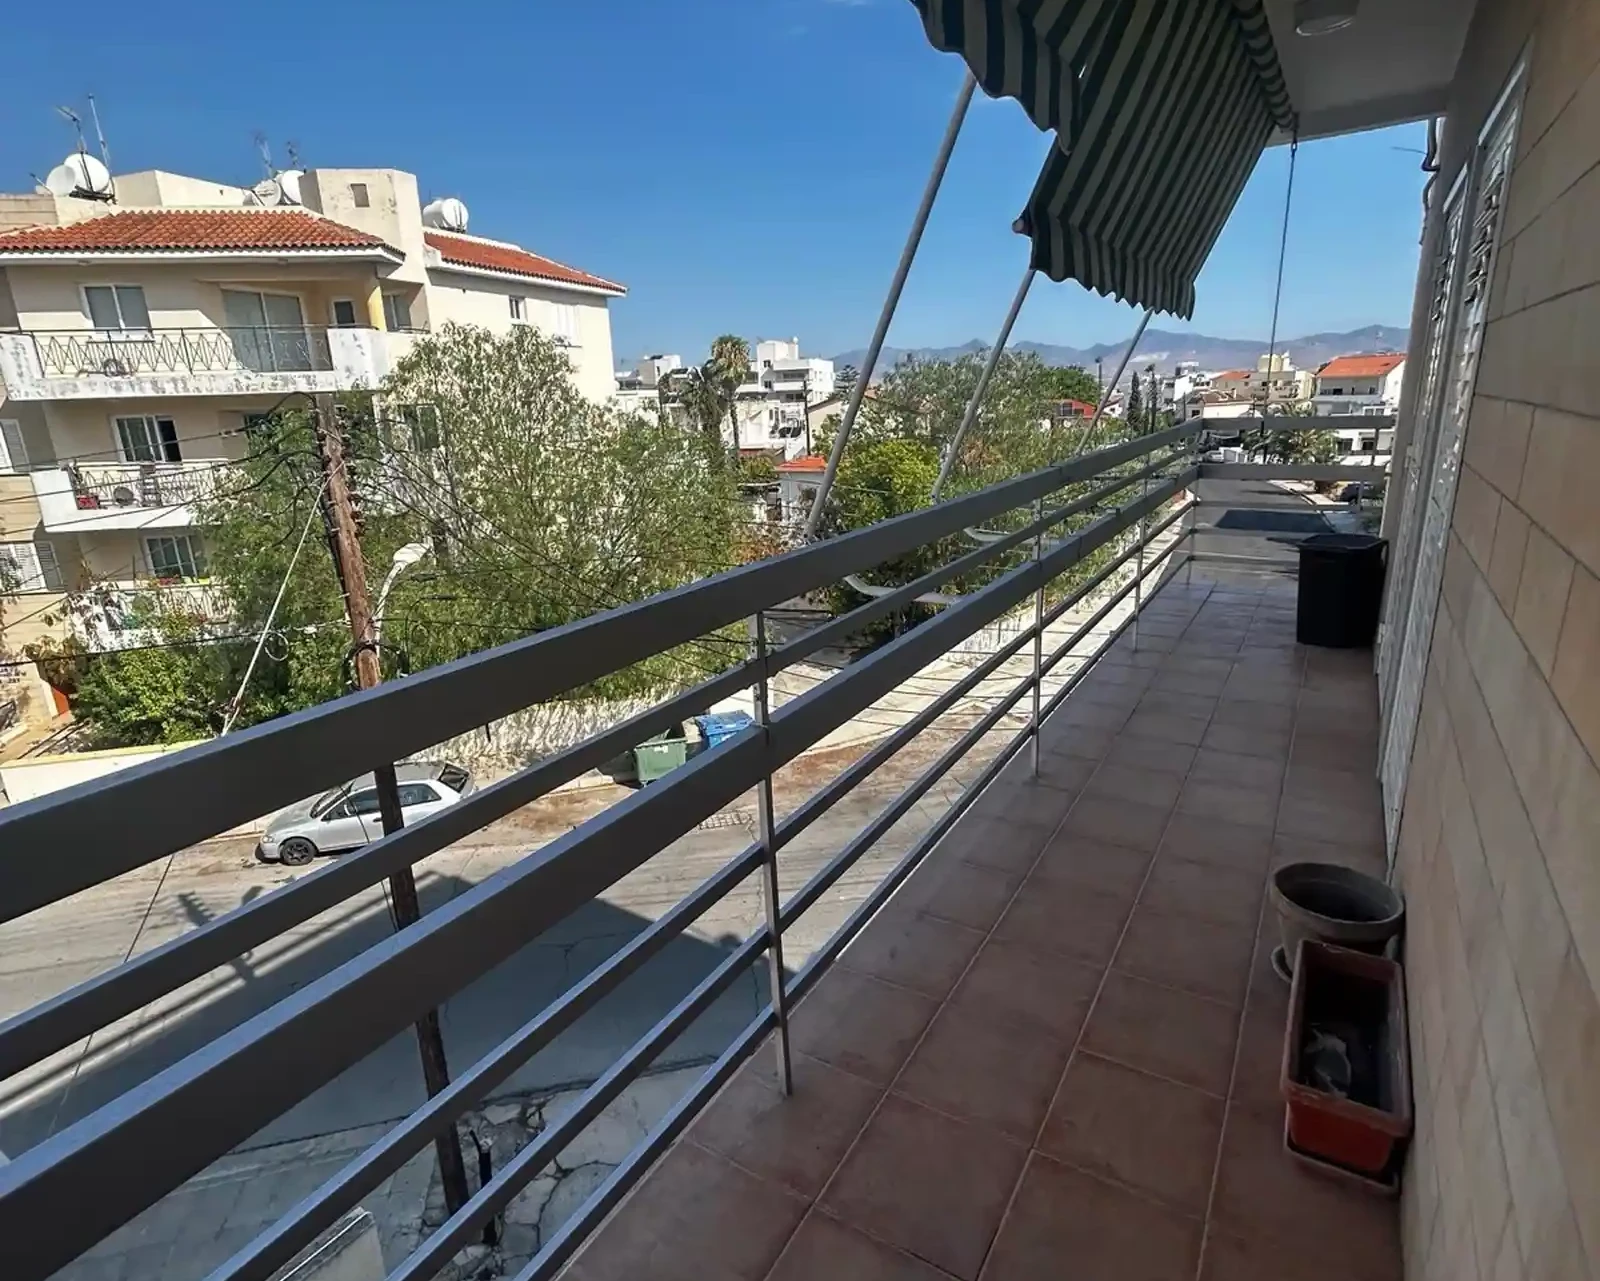 2-bedroom apartment fоr sаle €160.000, image 1